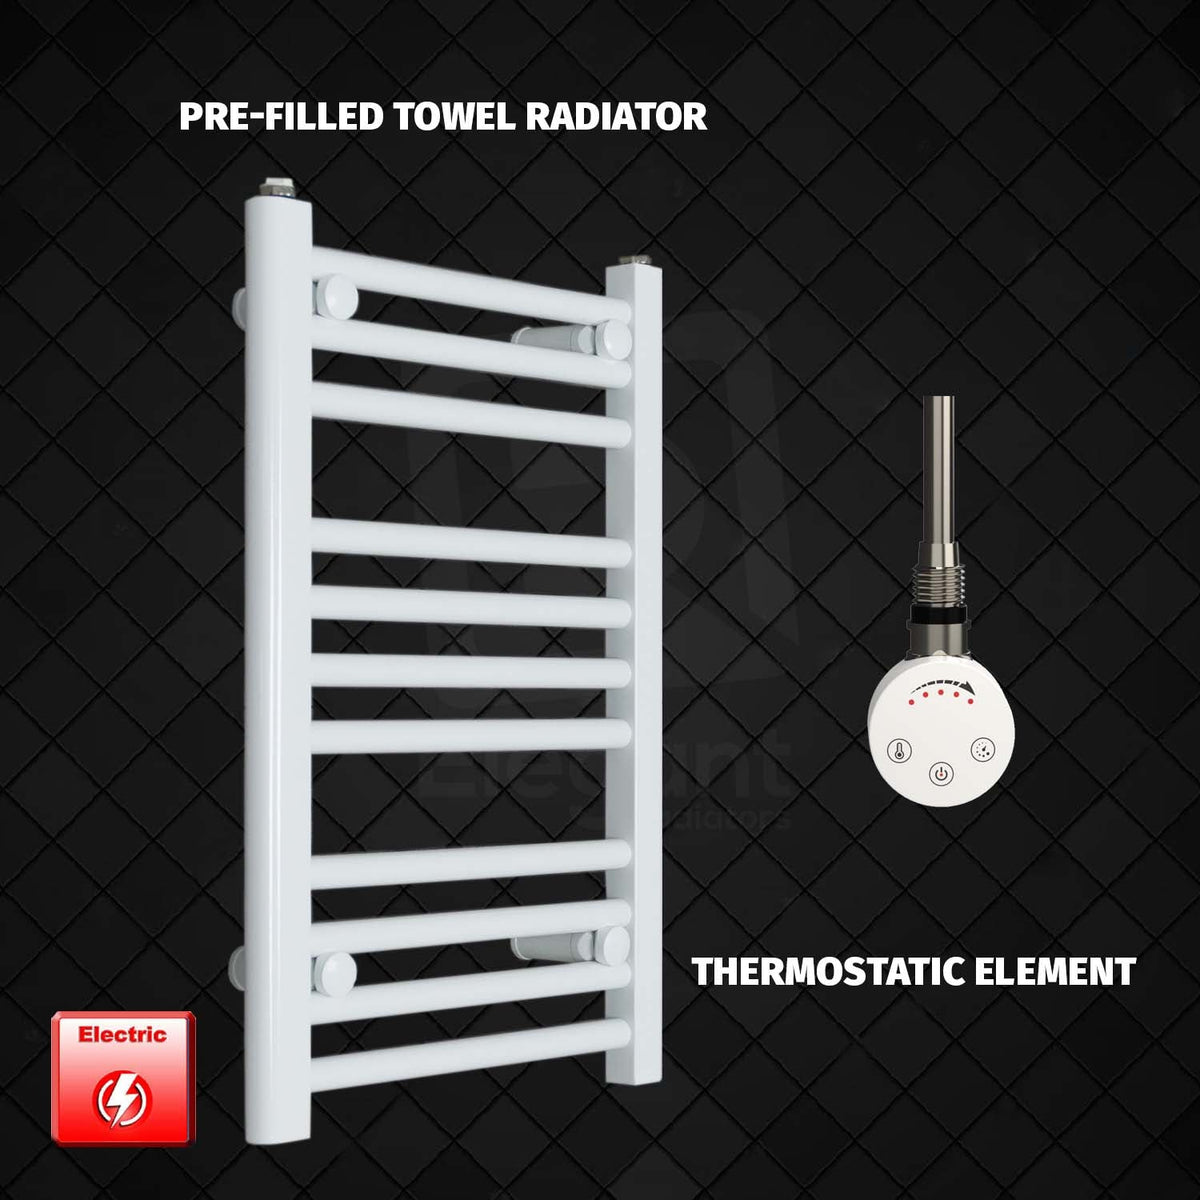 600 mm High 450 mm Wide Pre-Filled Electric Heated Towel Radiator White HTR smart thermostatic element no tomer